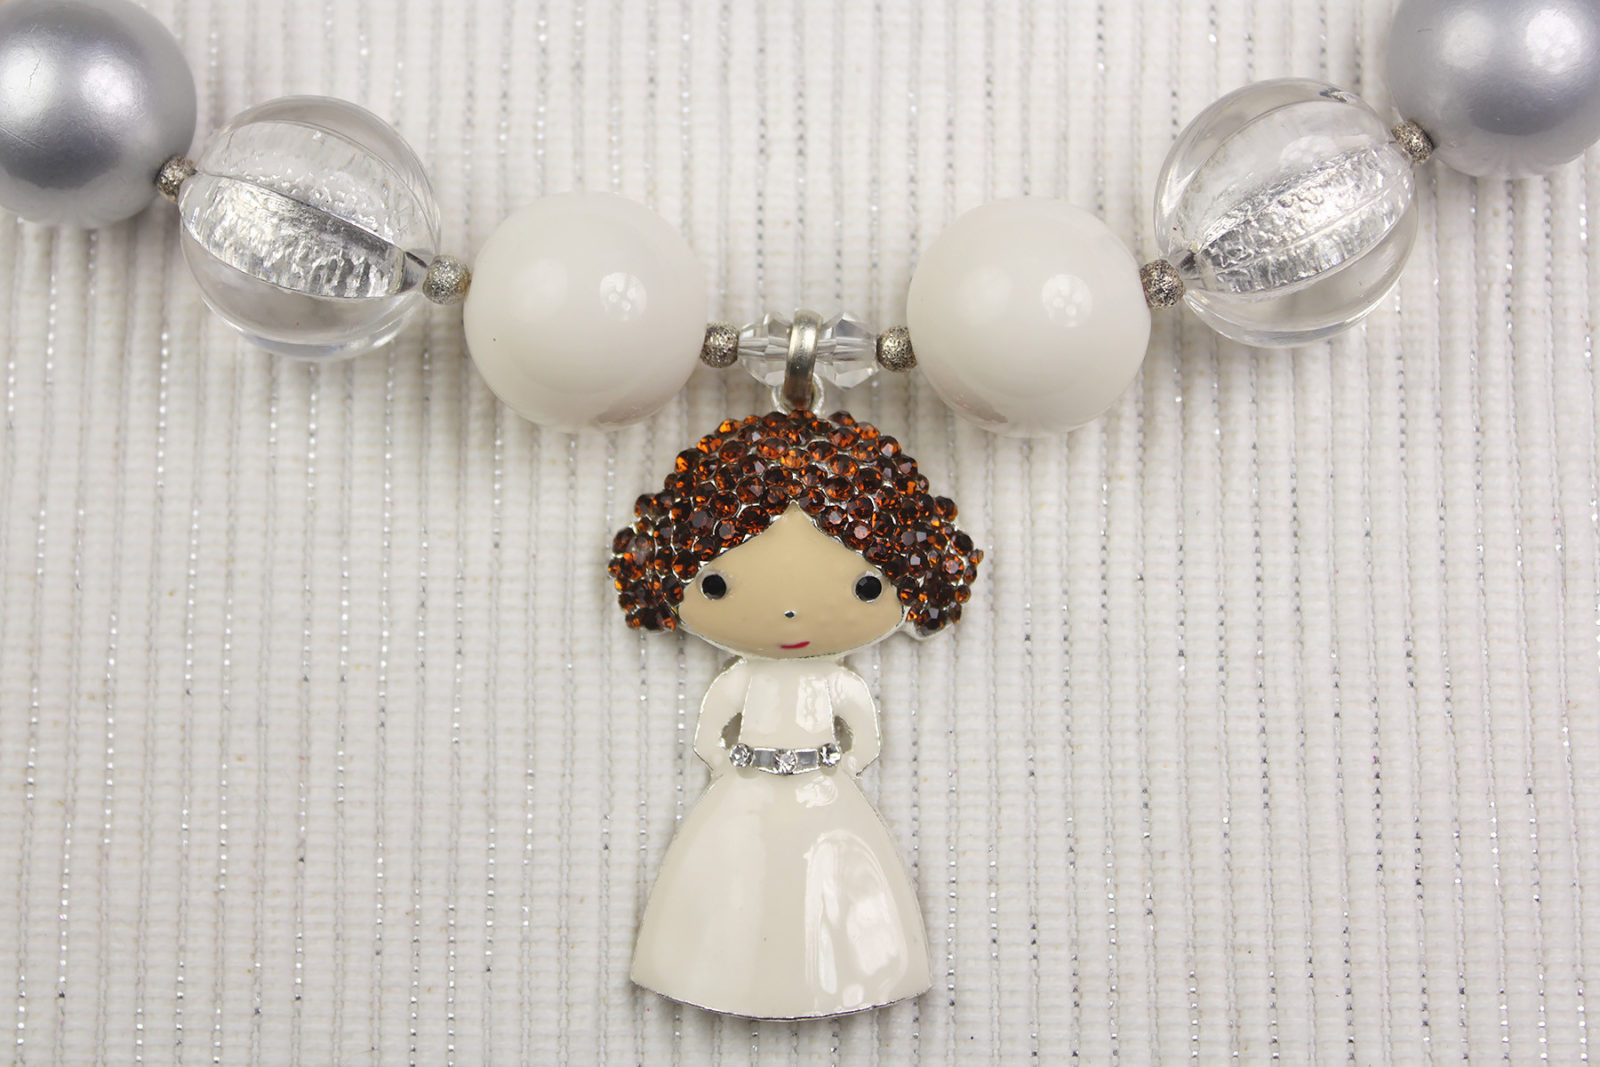 Star Wars Princess Leia chunky beaded necklace by Etsy seller Little Black Bow